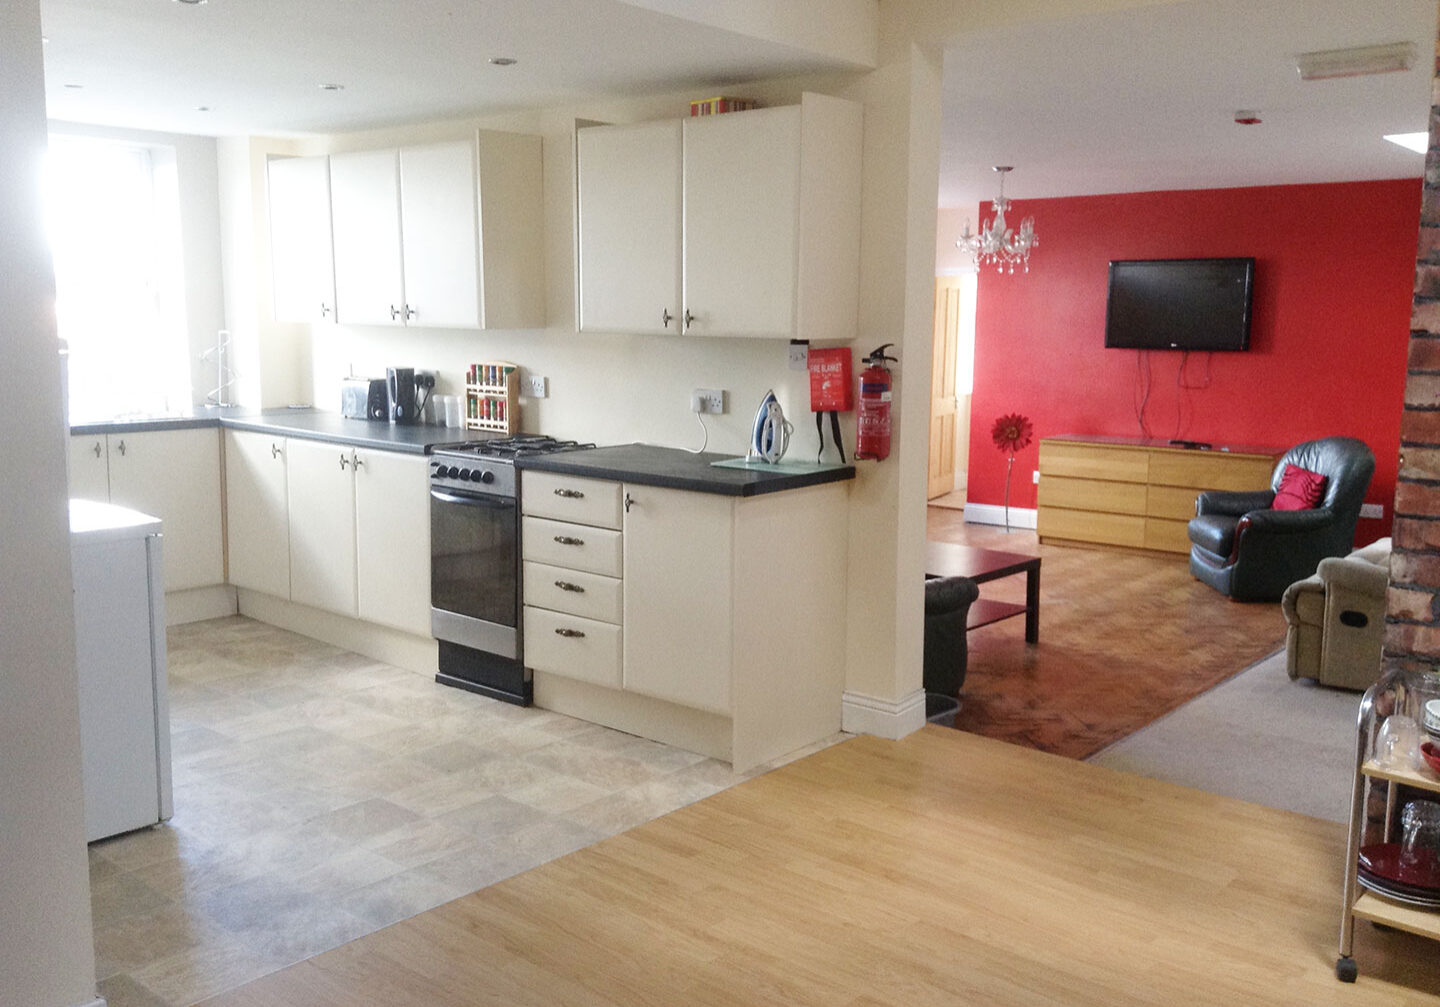 Affordable student accommodation 6 bedroom student flat - student accommodation sunderland